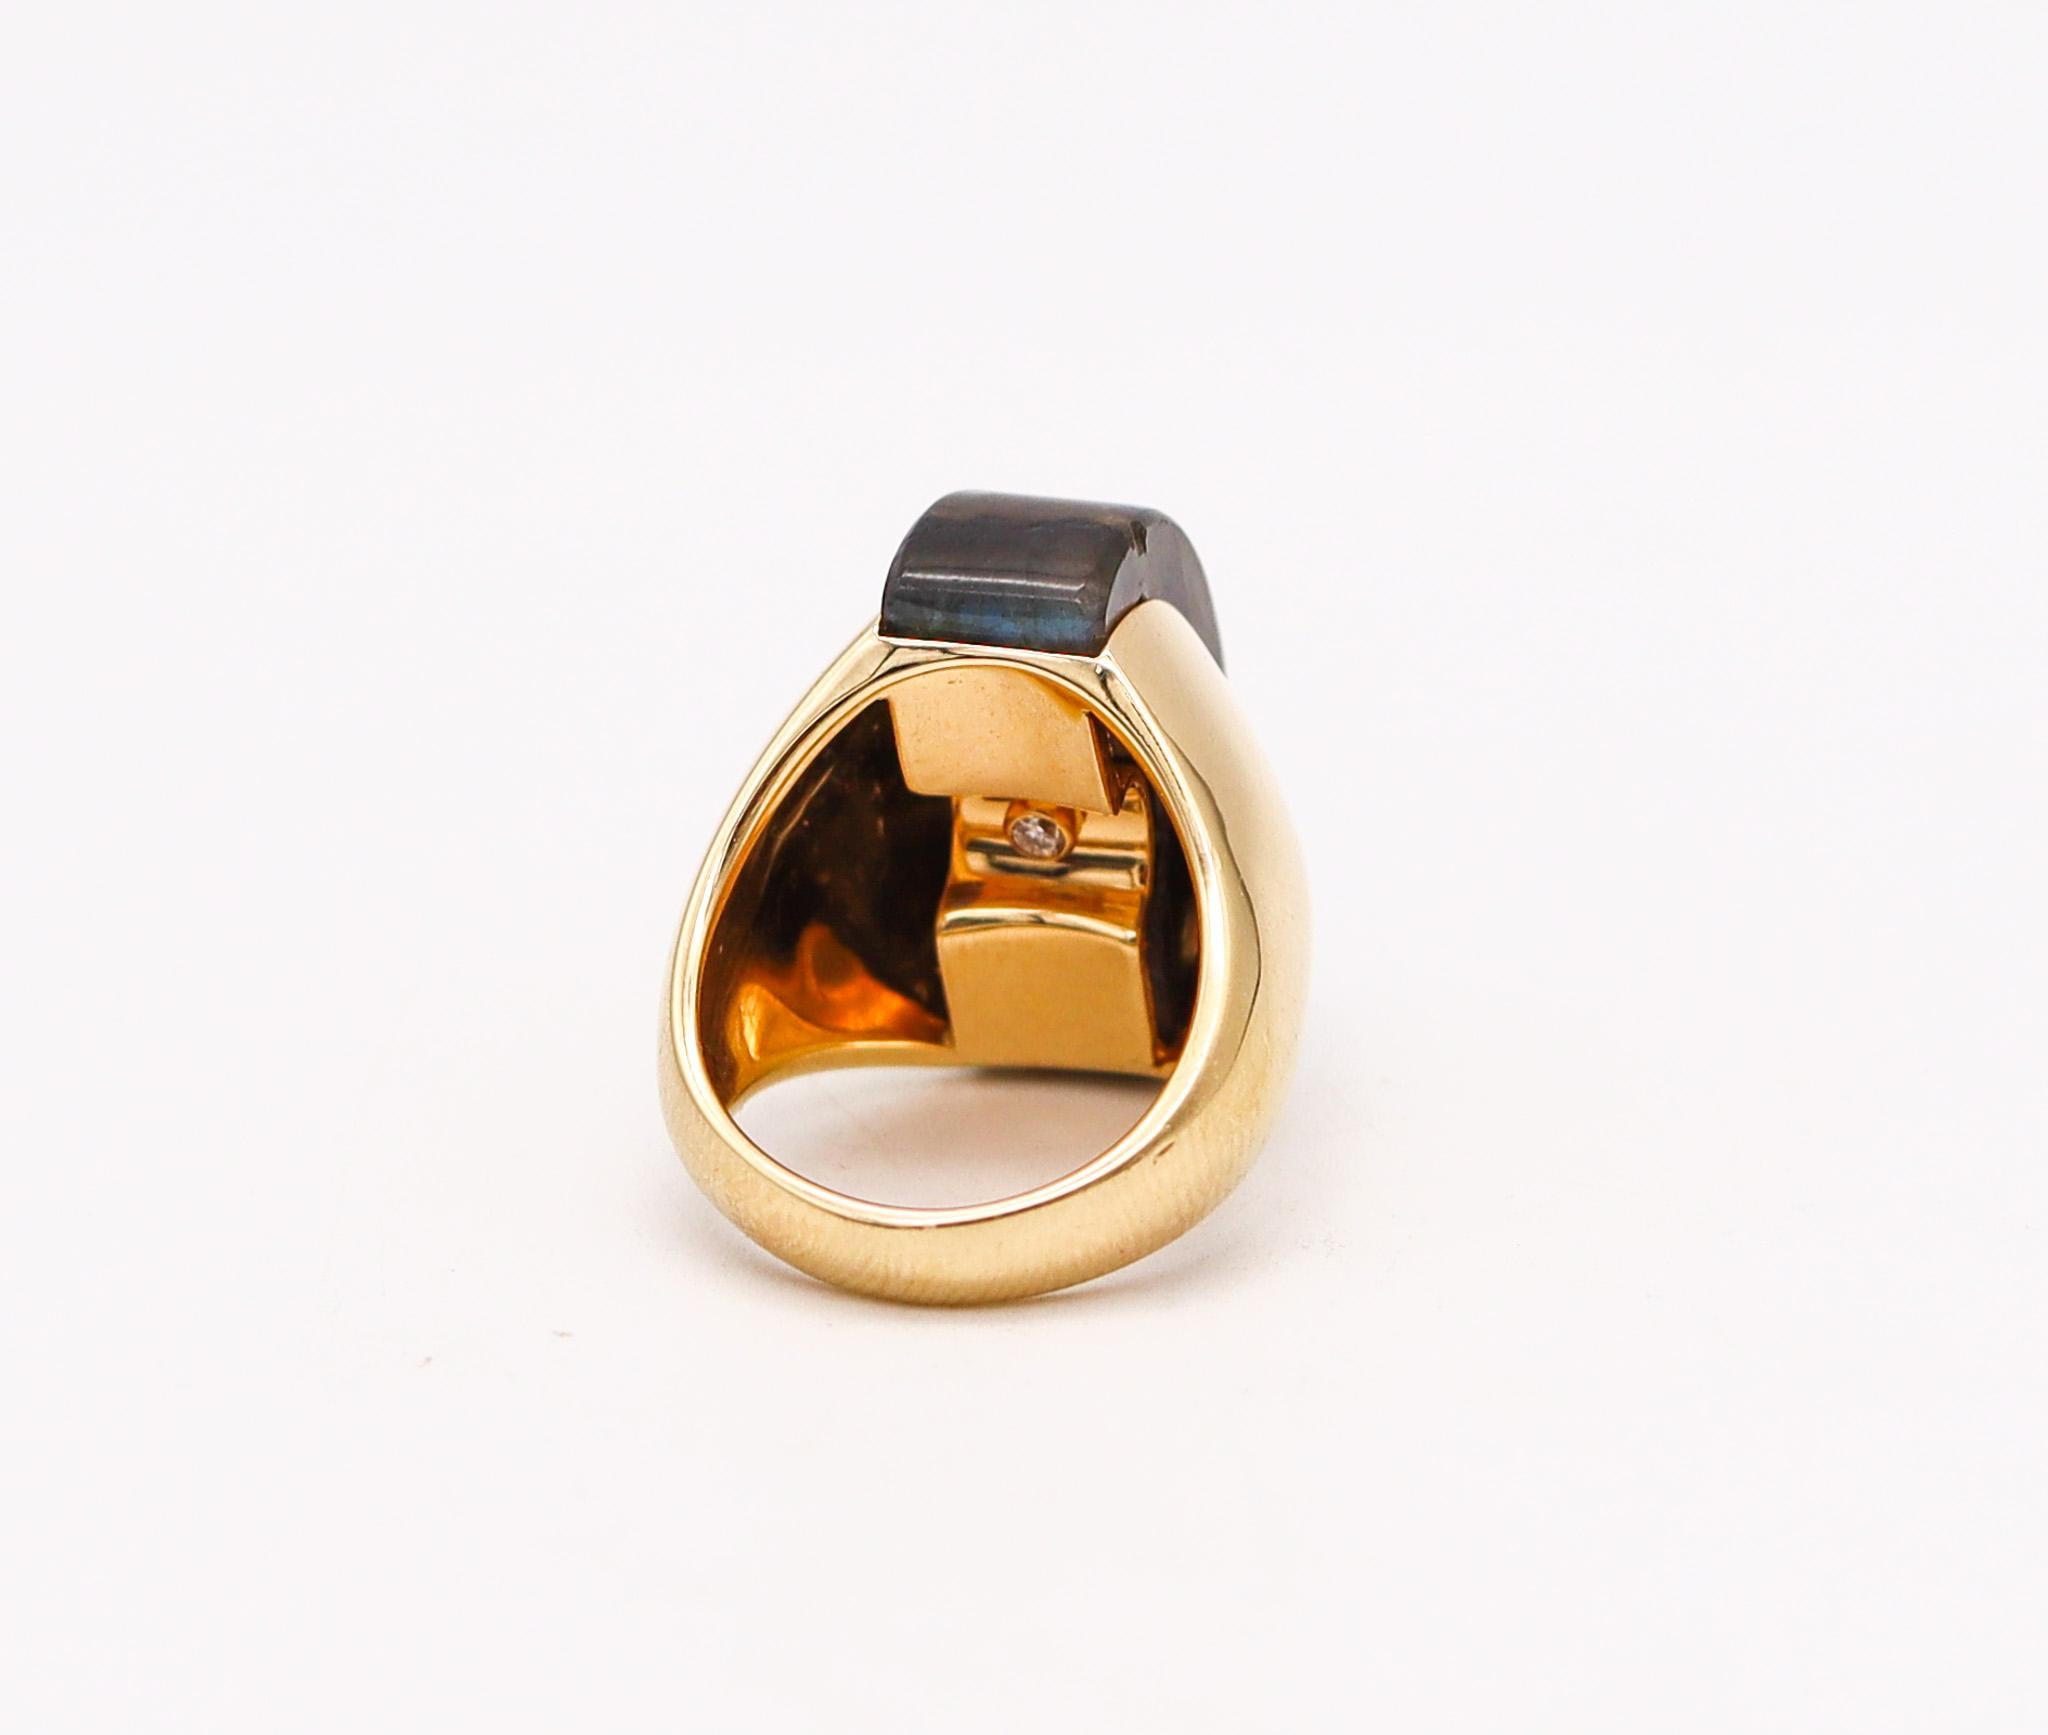 Cabochon Aletto Brothers Geometric Cocktail Ring in 18 Karat Yellow Gold with Labradorite For Sale